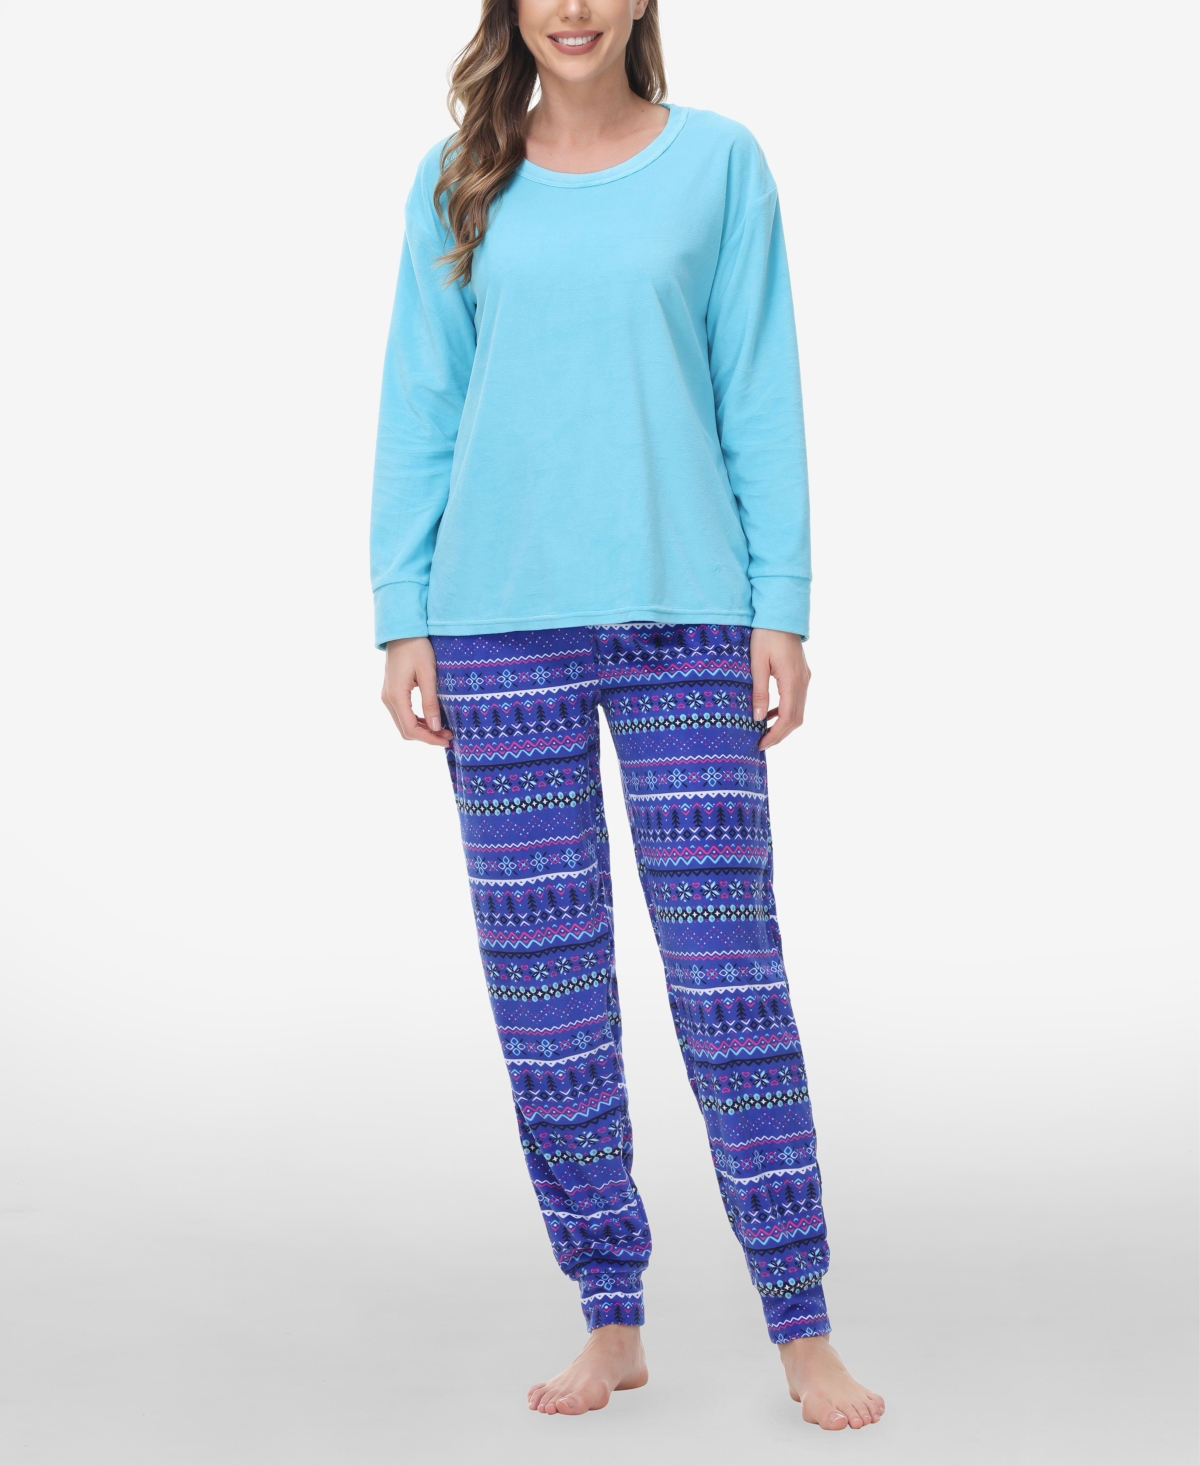 Women's Long Sleeve Crew Top with Jogger, Set of 2 - Cold Fairisle